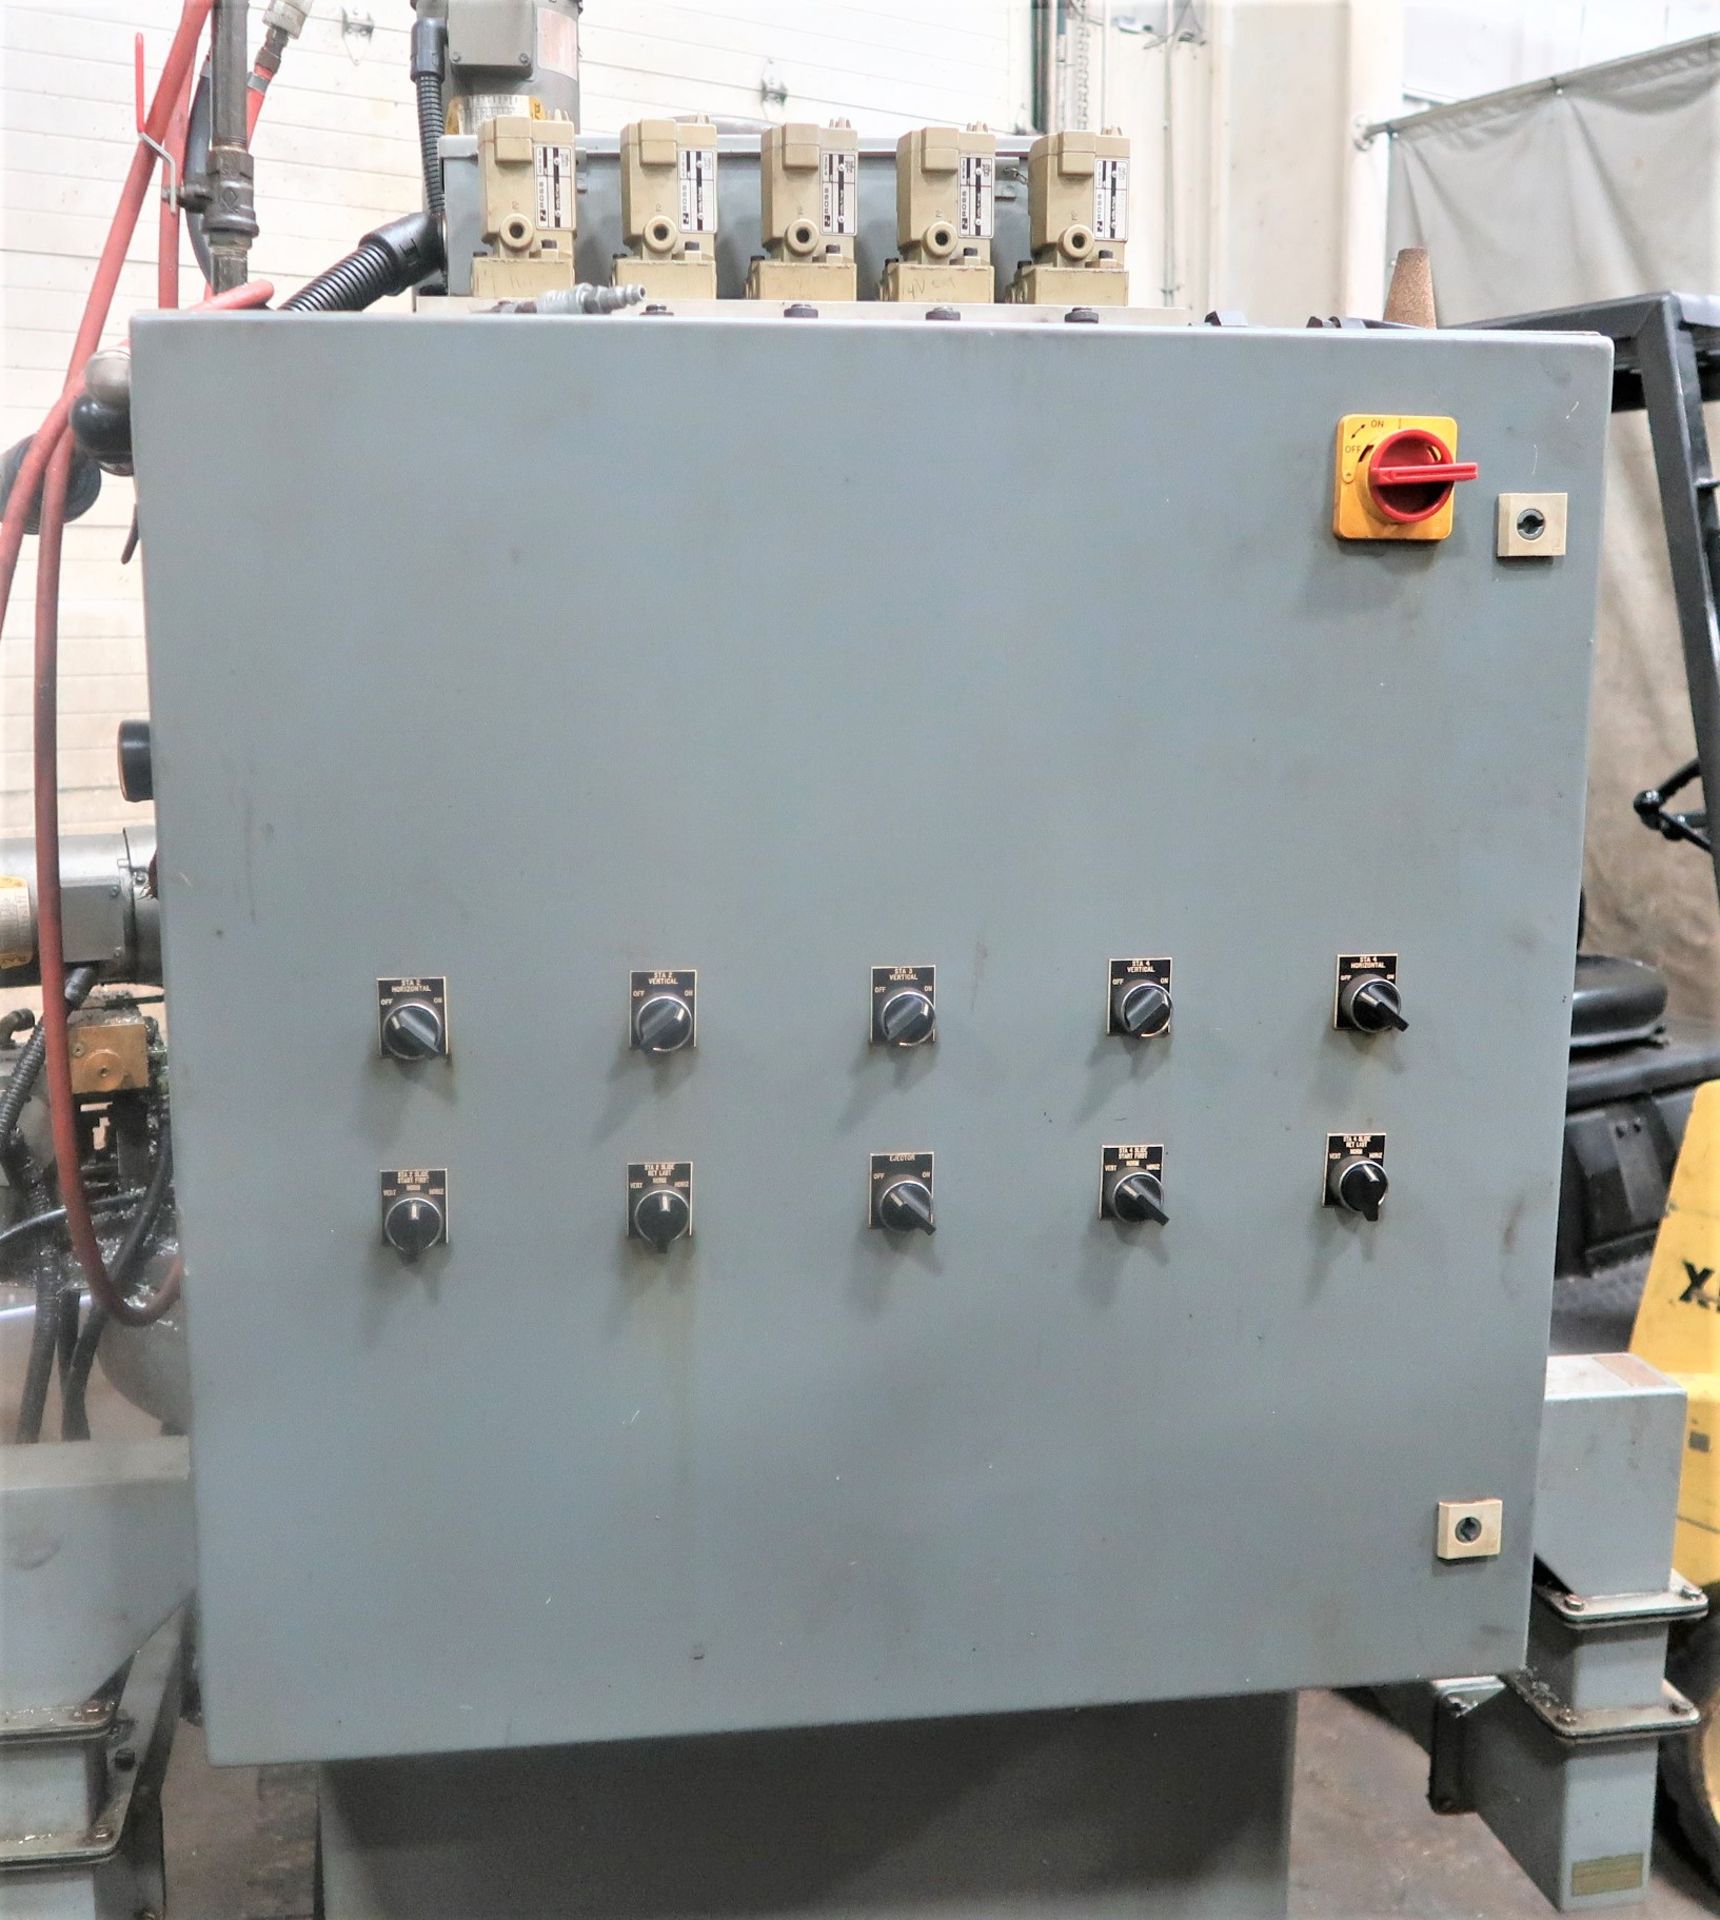 MSO DAVENPORT 5-SPINDLE MULTIPLE SECONDAY OPERATION ROTARY TRANSFER MACHINE - Image 5 of 9